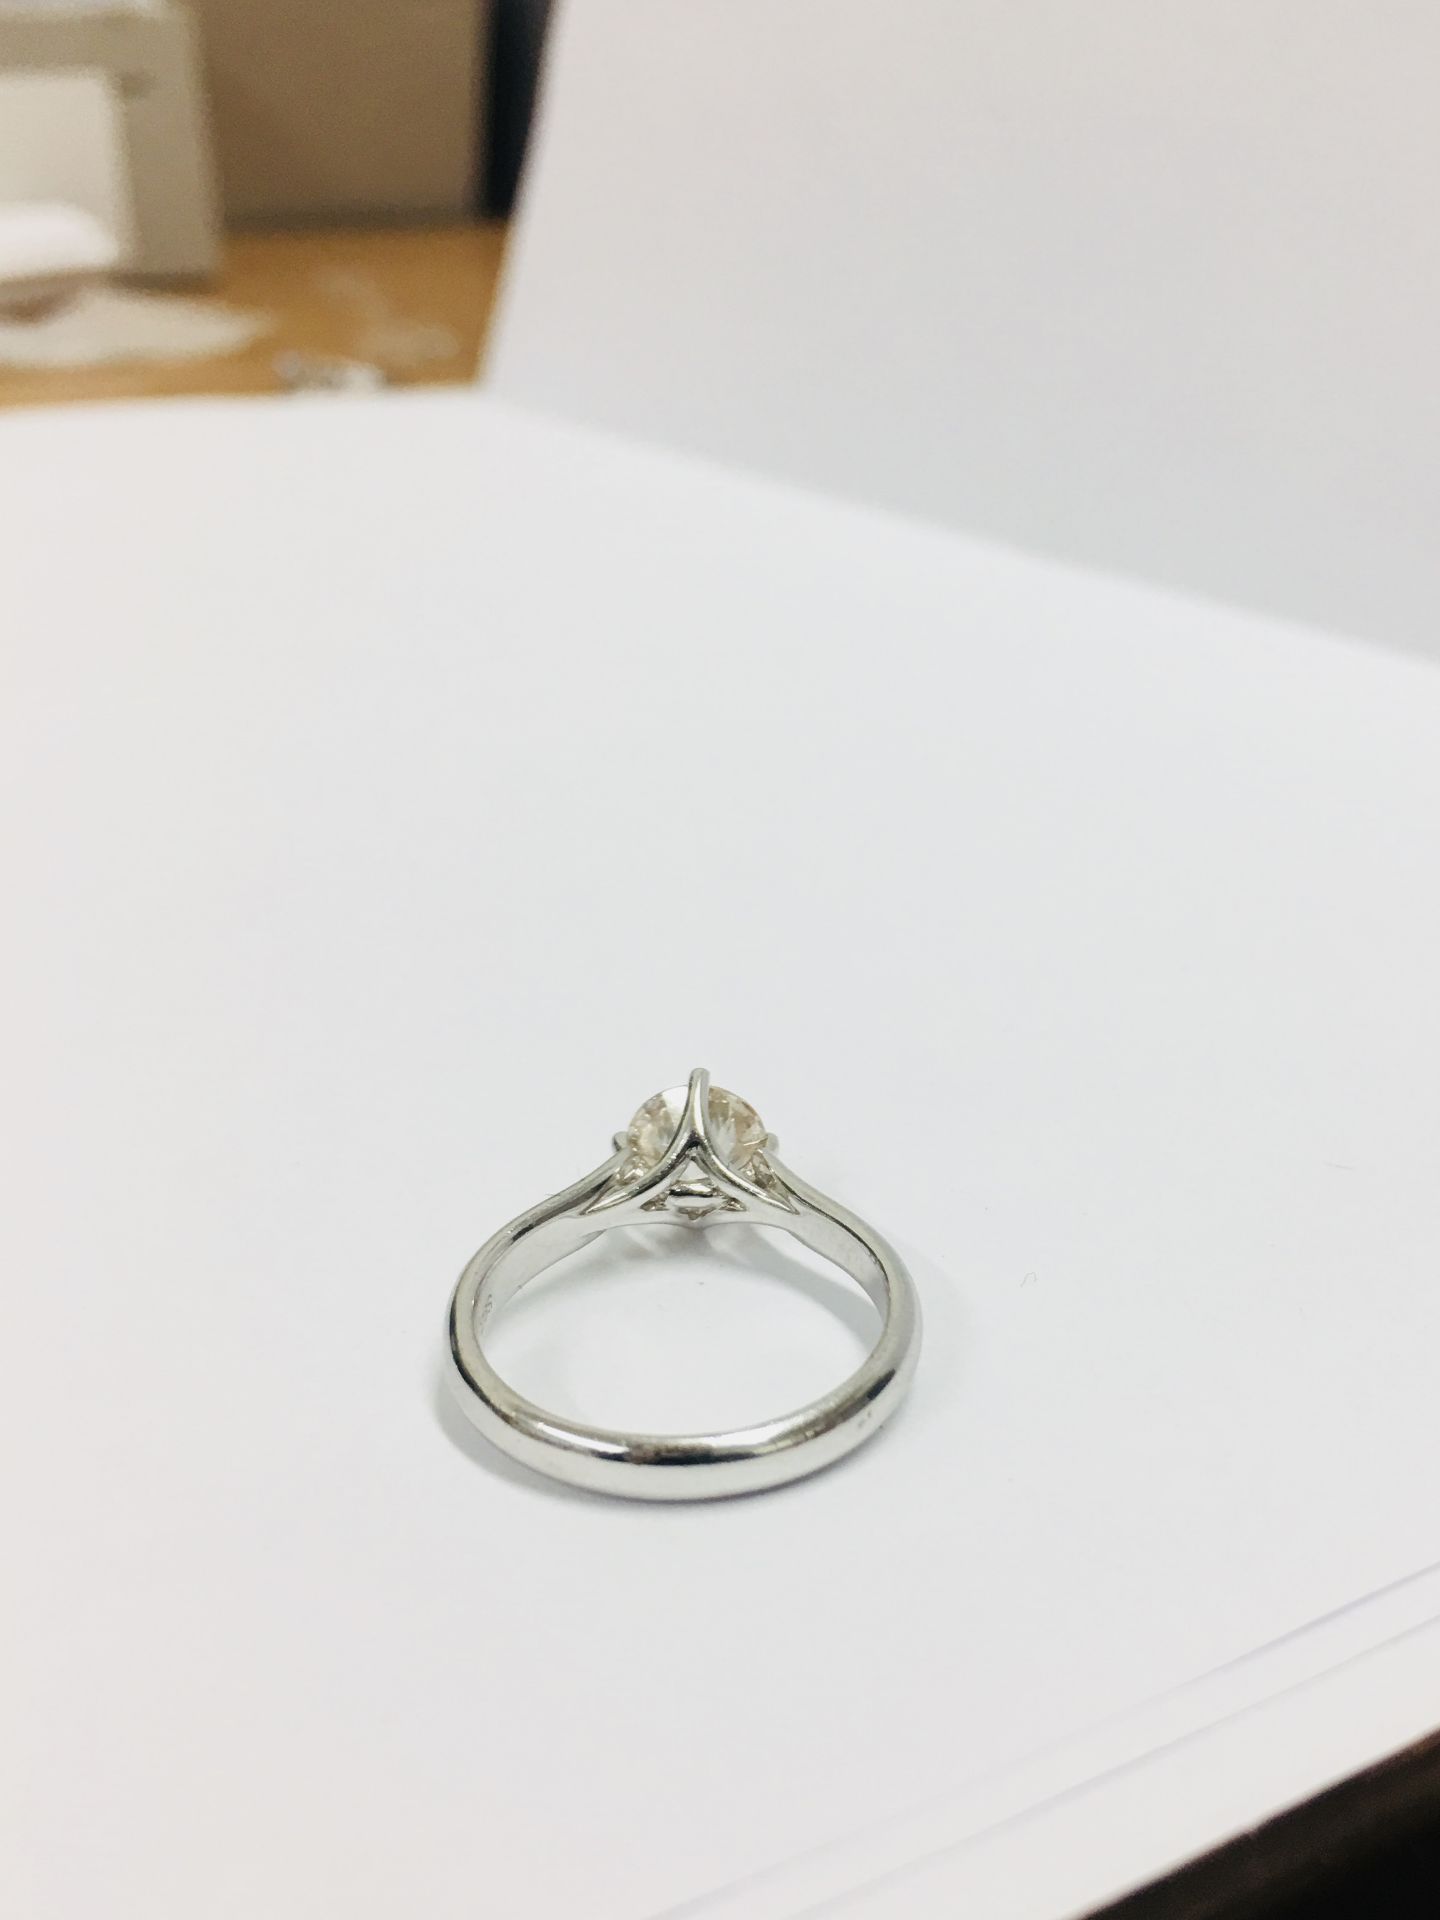 1.09ct diamond solitaire ring set in 18ct gold. Brilliant cut diamond G colour and SI2 clarity. ( - Image 3 of 6